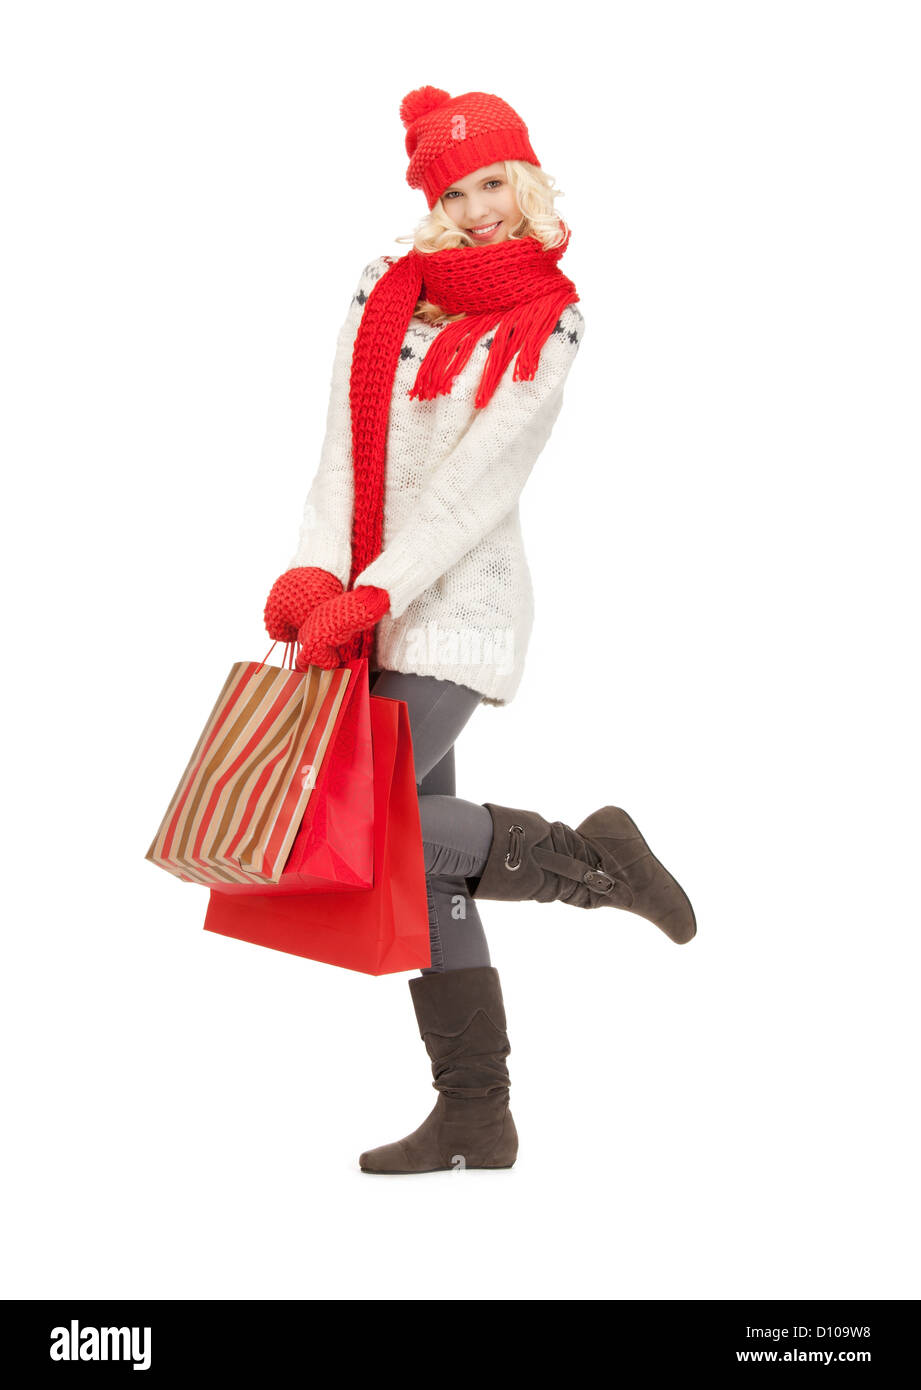 young girl with shopping bags Stock Photo